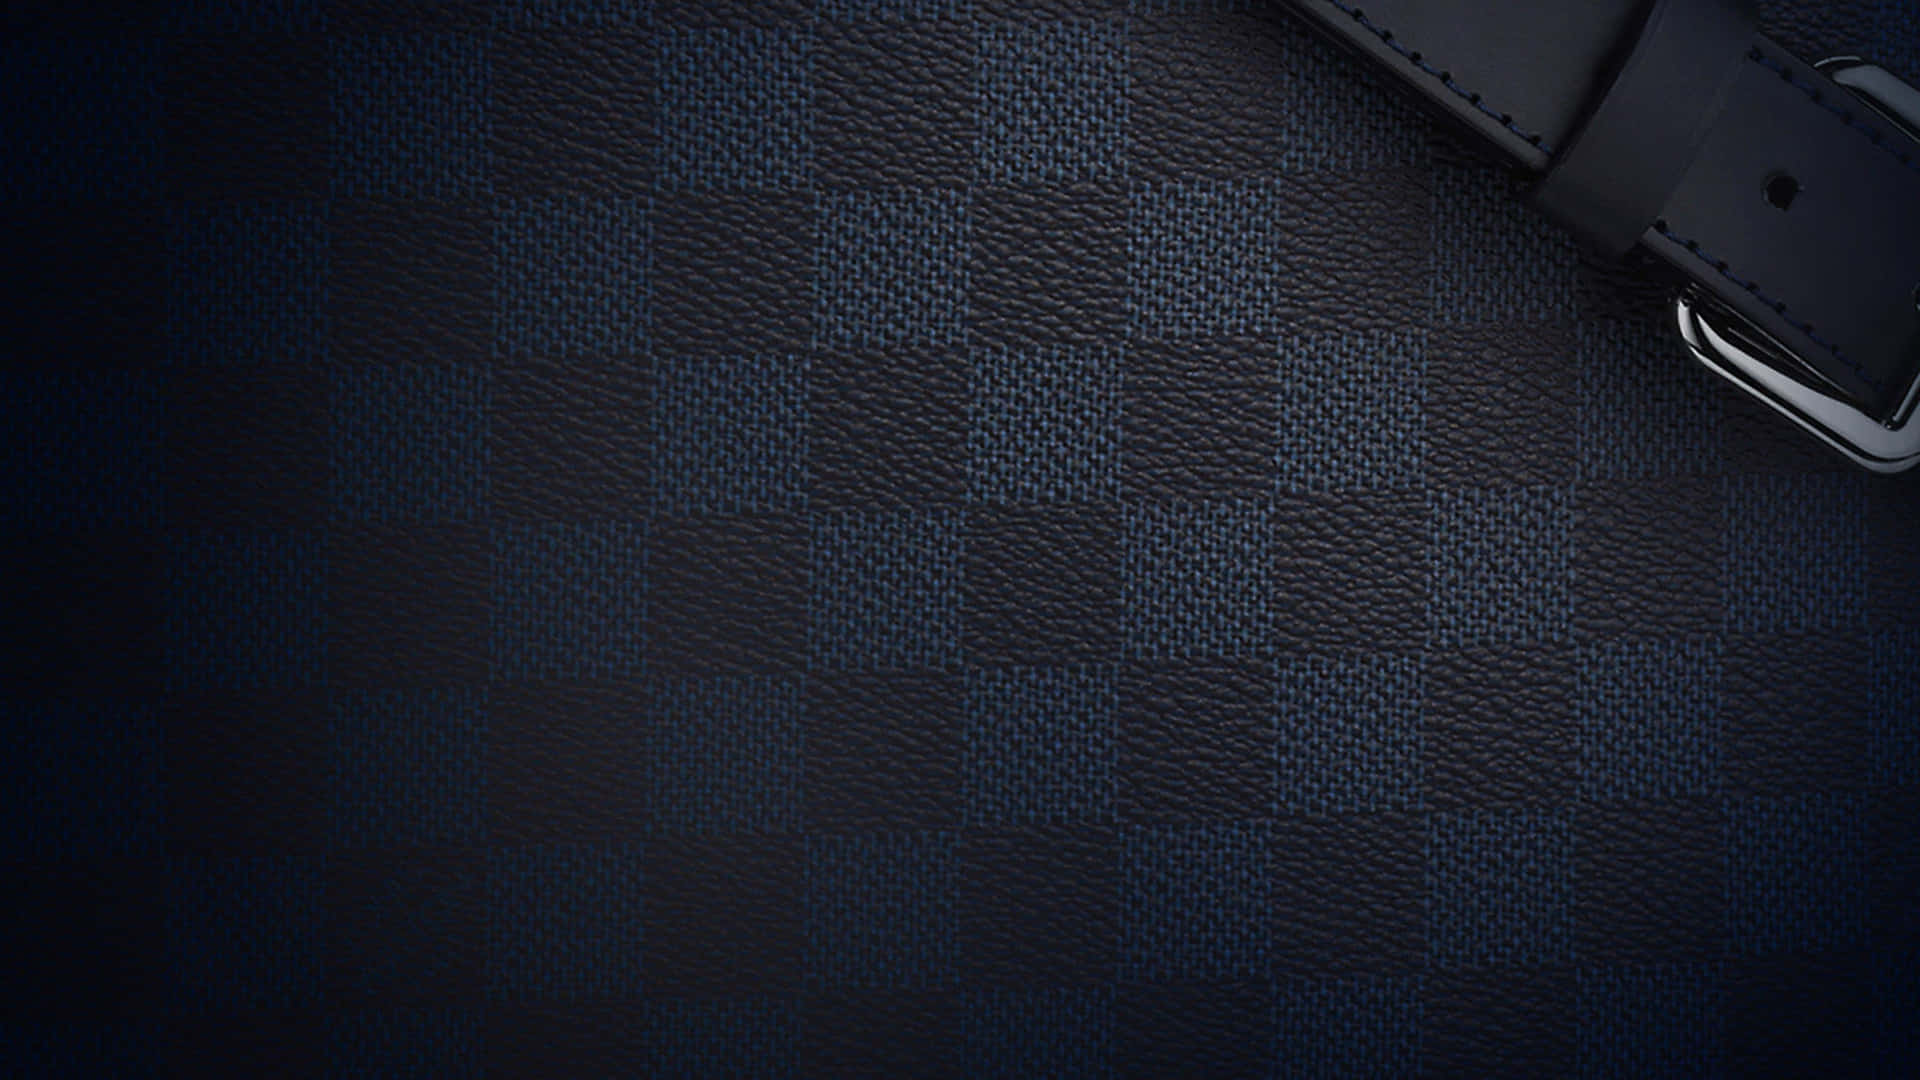 Experience the luxury of Louis Vuitton with this beautiful 4K wallpaper Wallpaper